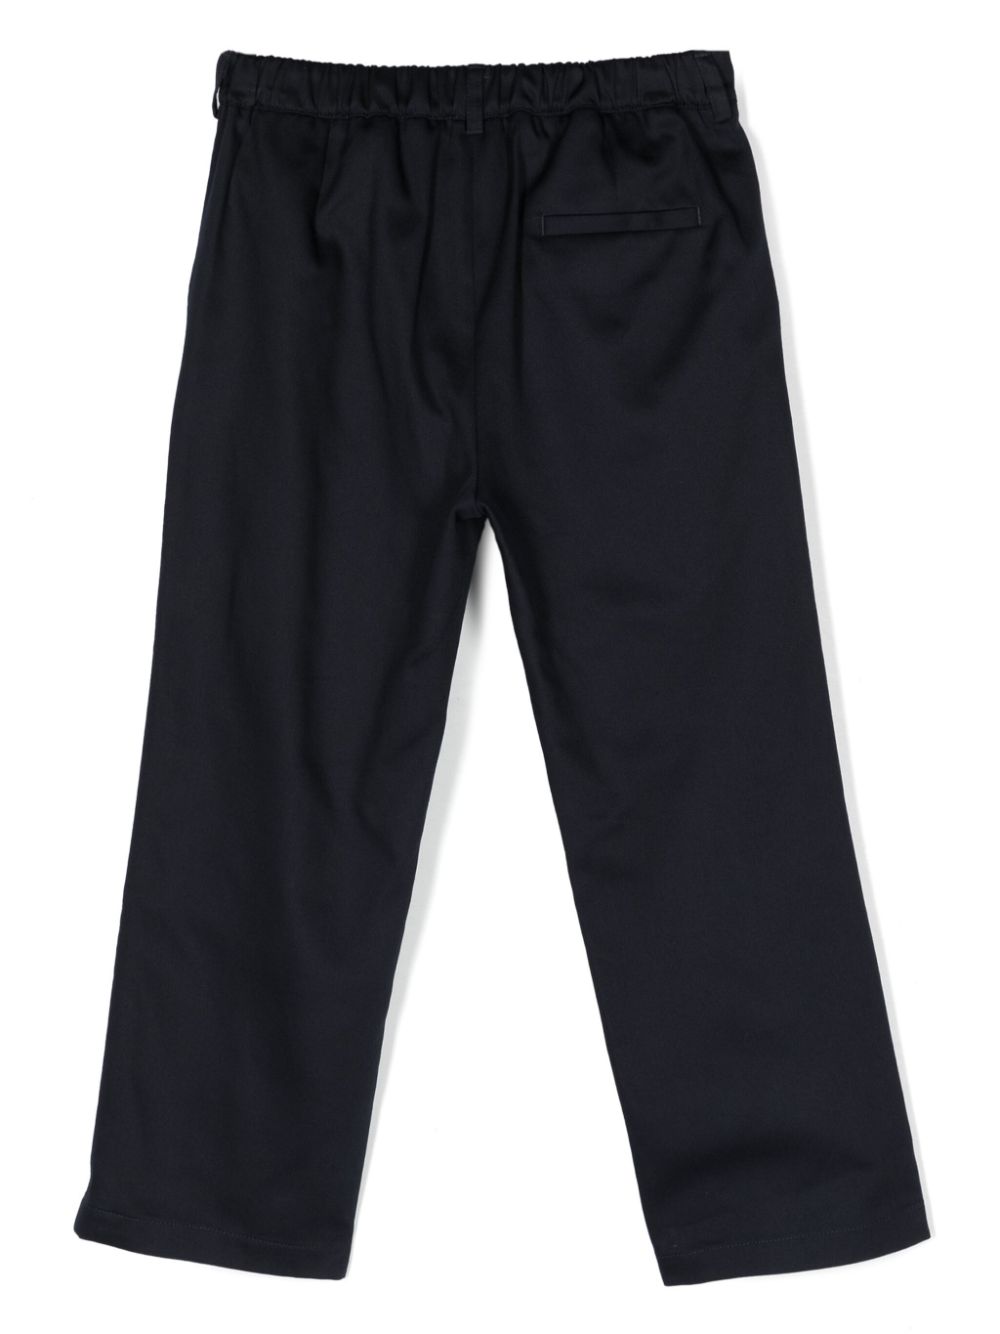 Trousers with Greca motif